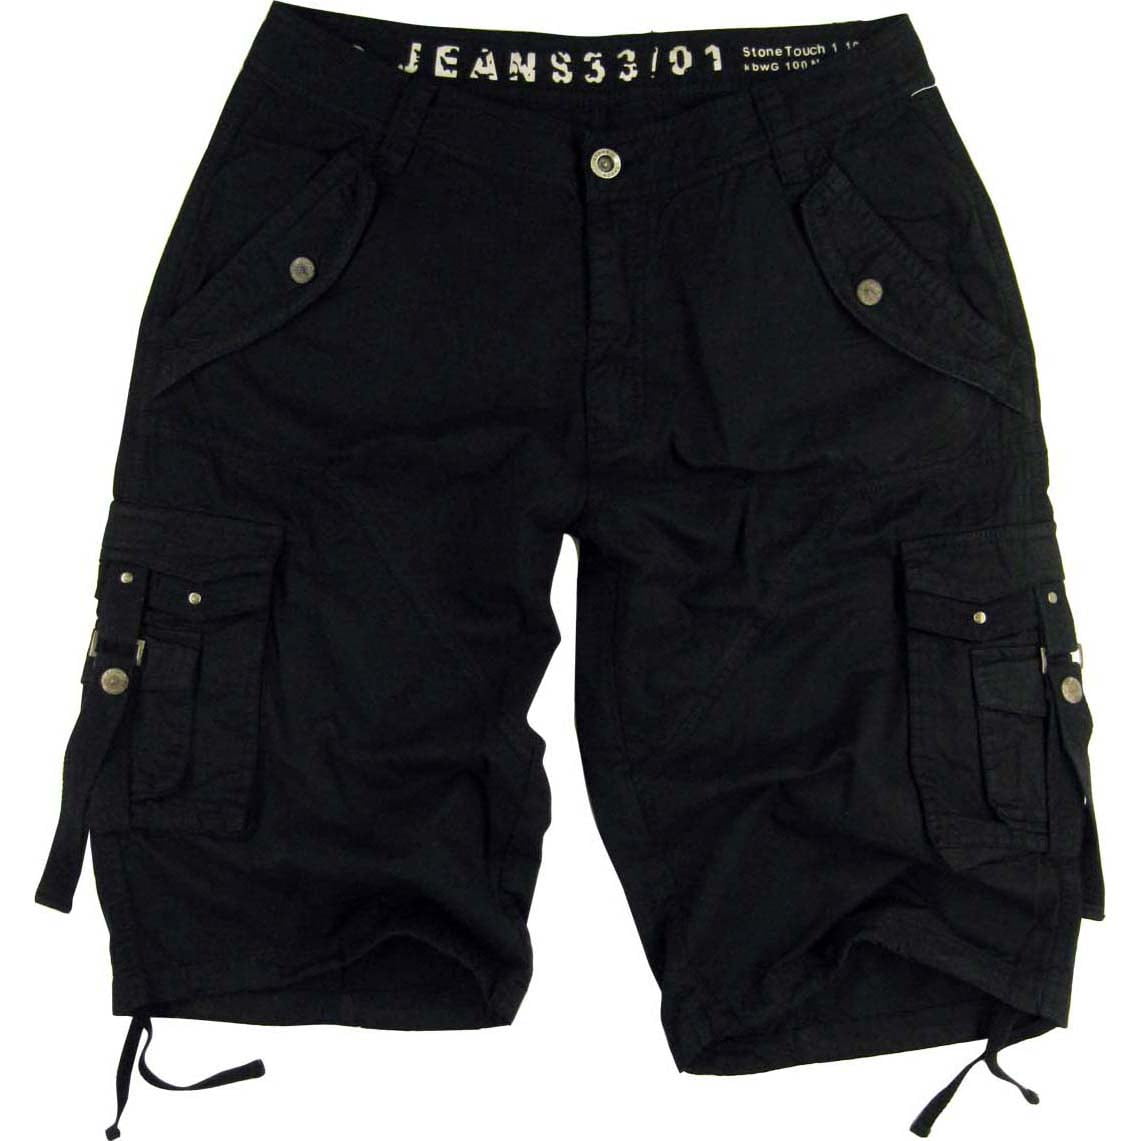 Stone Touch Jeans - Mens Black Cargo Shorts Military #A8s Size:40 ...